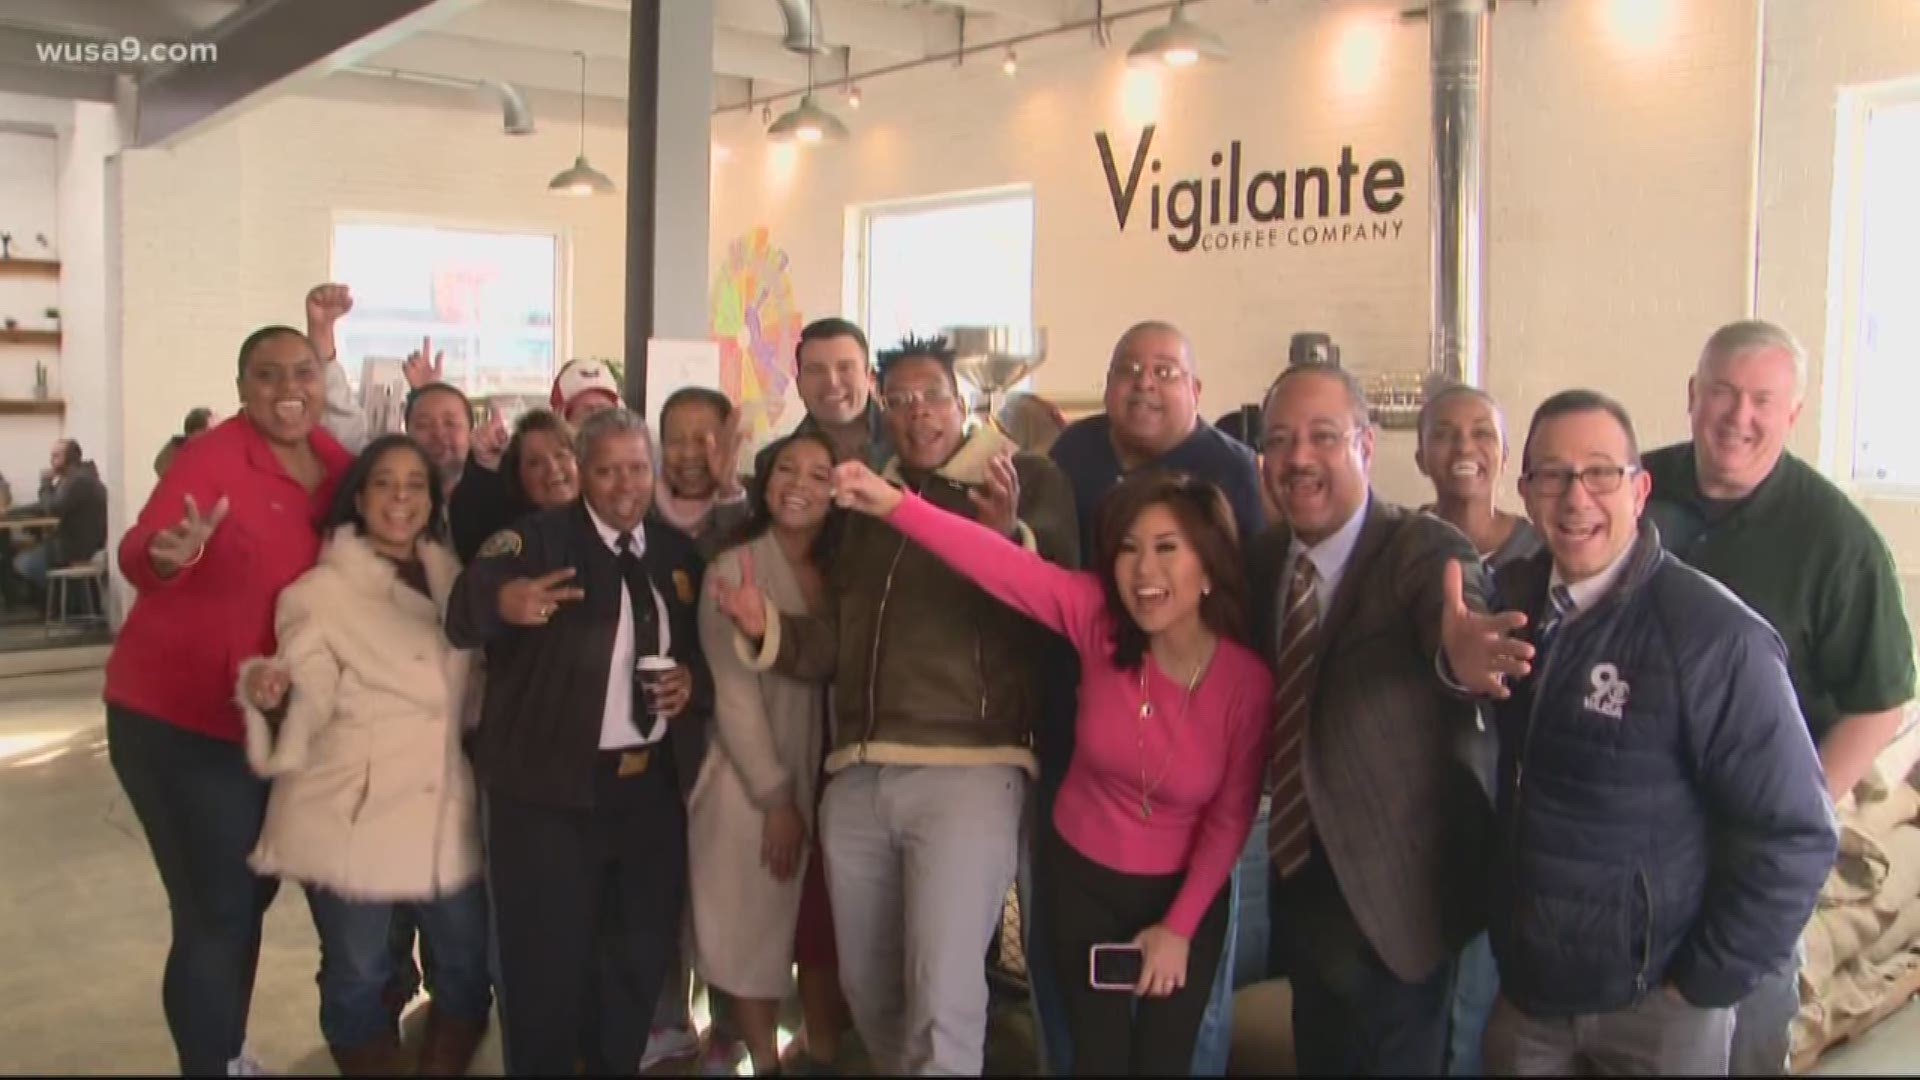 WUSA9 had to check out what was brewing up at Vigilante's Hyattsville location. So, the Get Up DC team held our first 'Get Up Meet-Up' of 2020 there and it was epic.